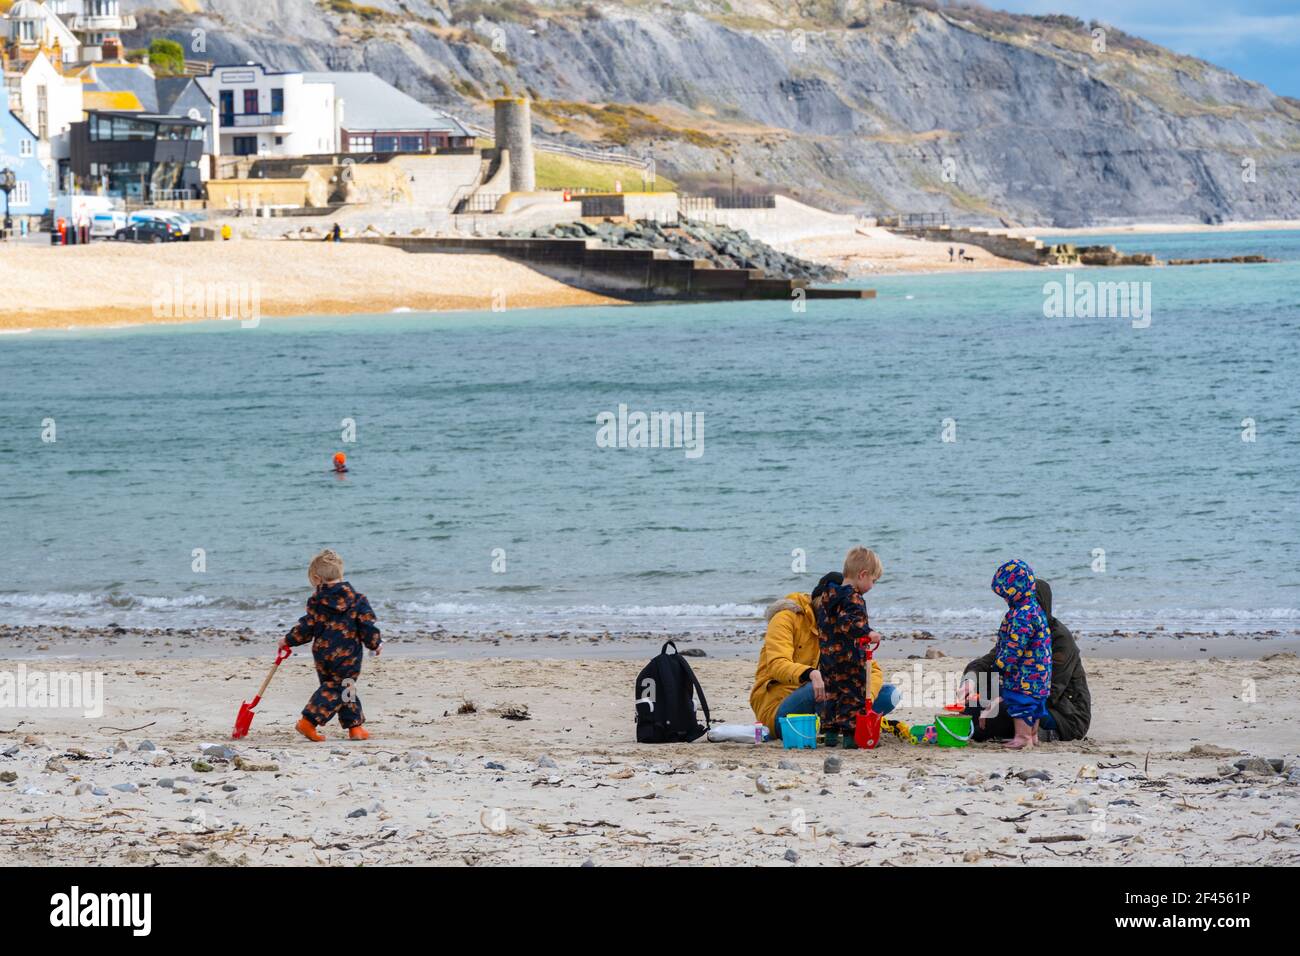 Lyme Regis, Dorset, UK. 19th Mar, 2021. UK Weather: A mixed bag of sunshine and cloud along with a chilly breeze at the seaside resort of Lyme Regis. A family enjoyed having the beach to themselves as the bracing sea breeze kept people away. Unsettled conditions are forecast over the weekend Credit: Celia McMahon/Alamy Live News Stock Photo